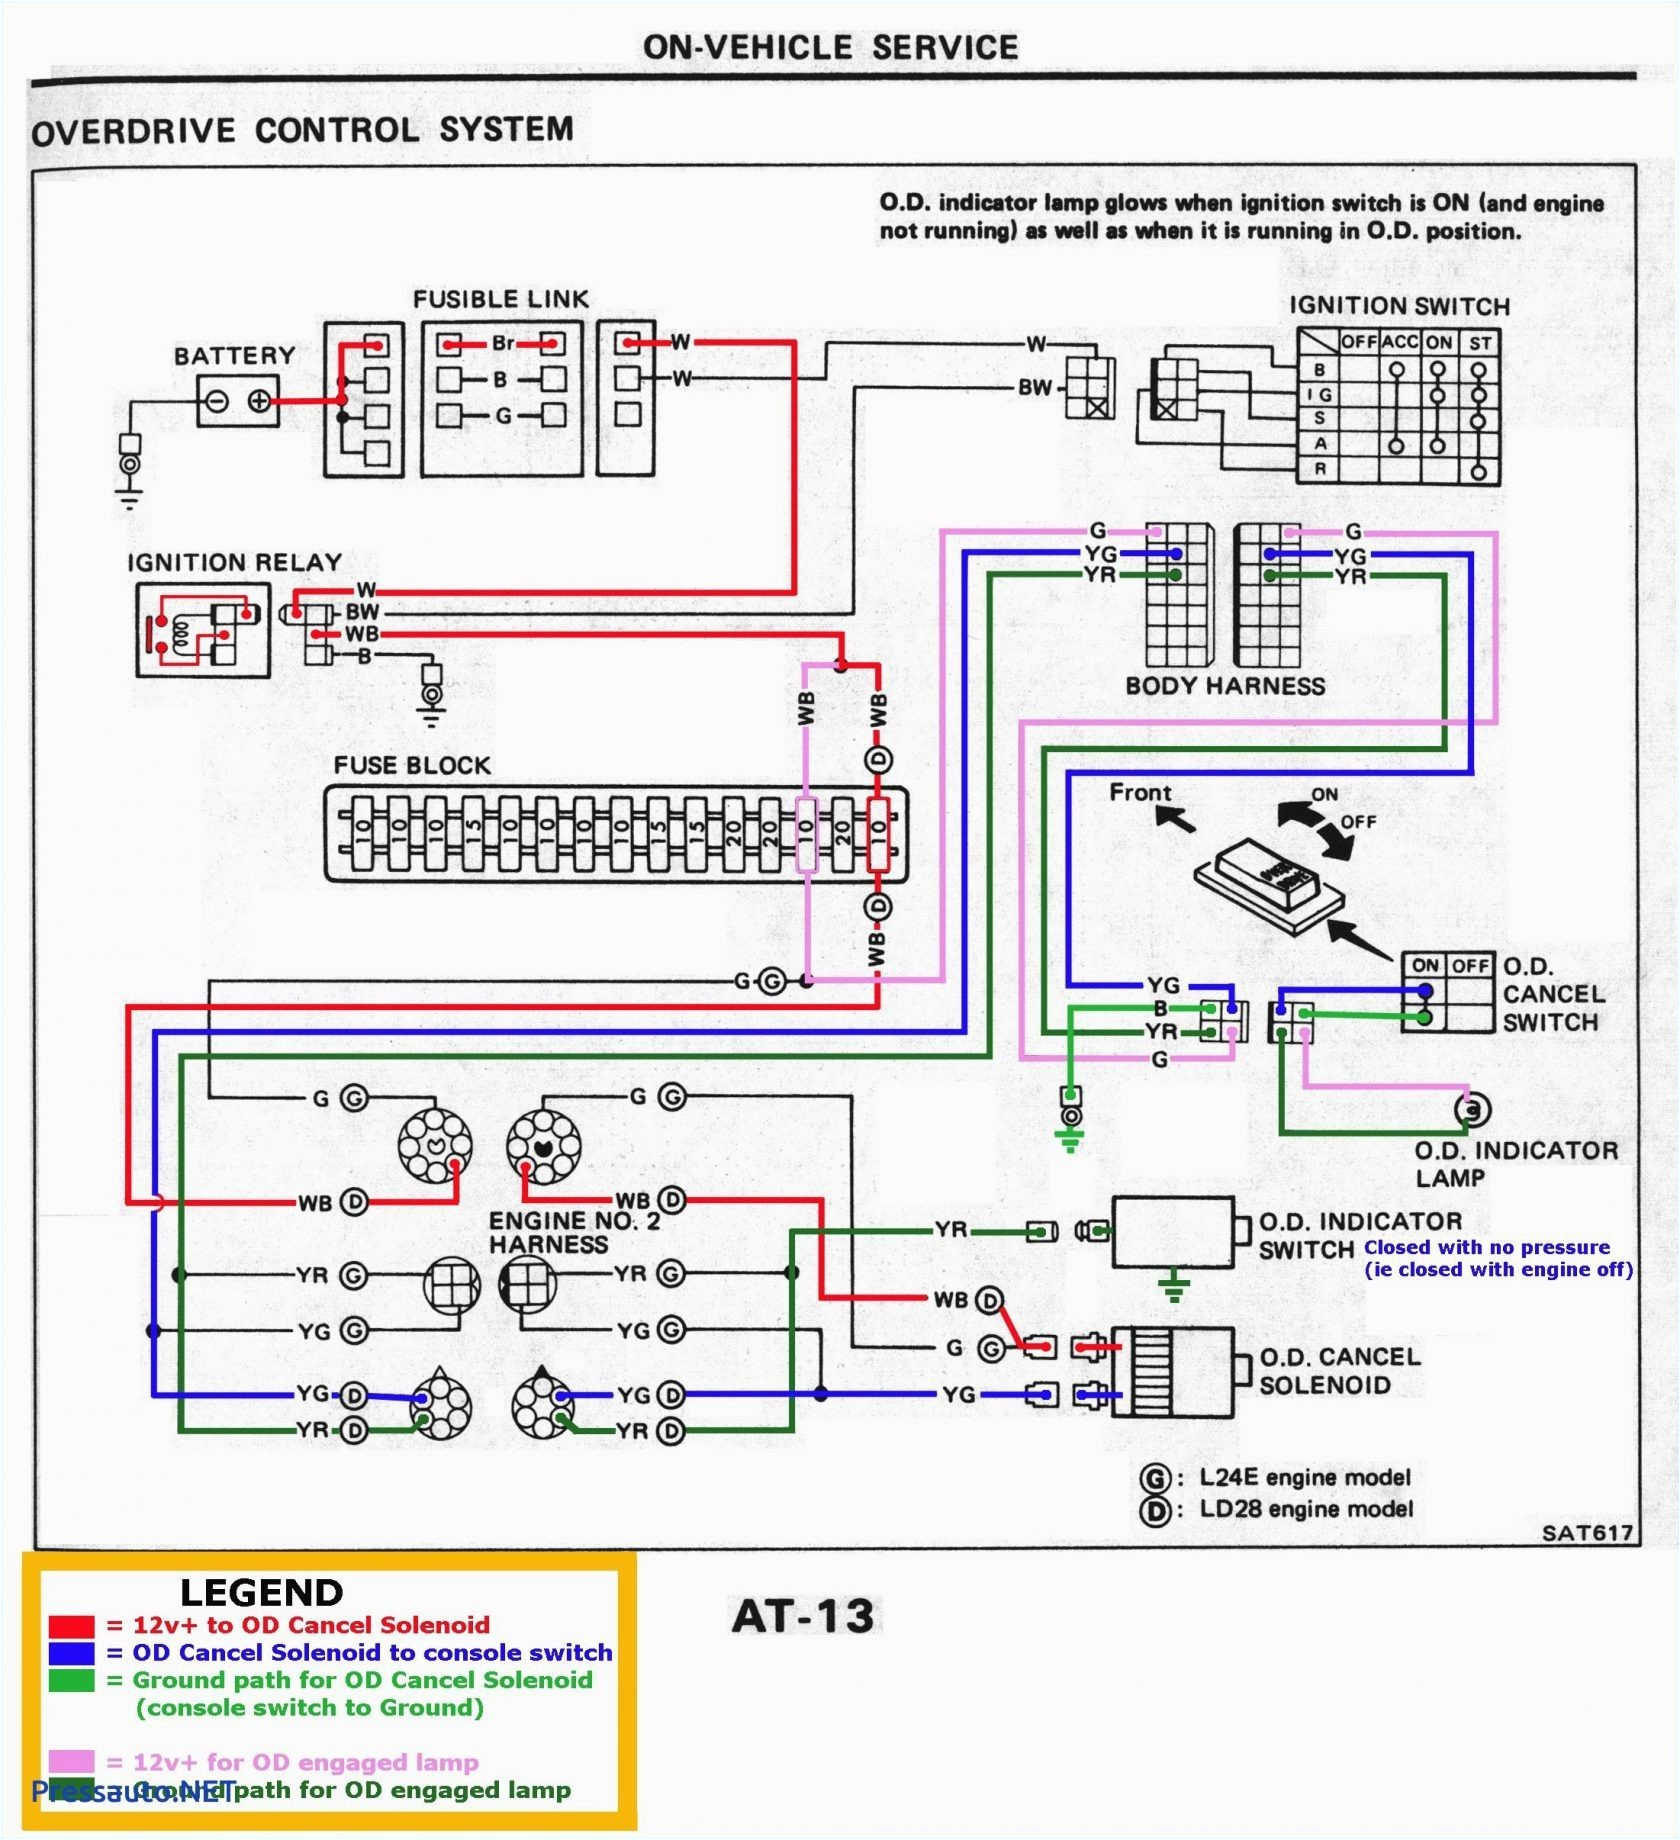 02 camry fuse box wiring diagram free download wiring diagram view wiring diagram for toyota camry get free image about wiring free